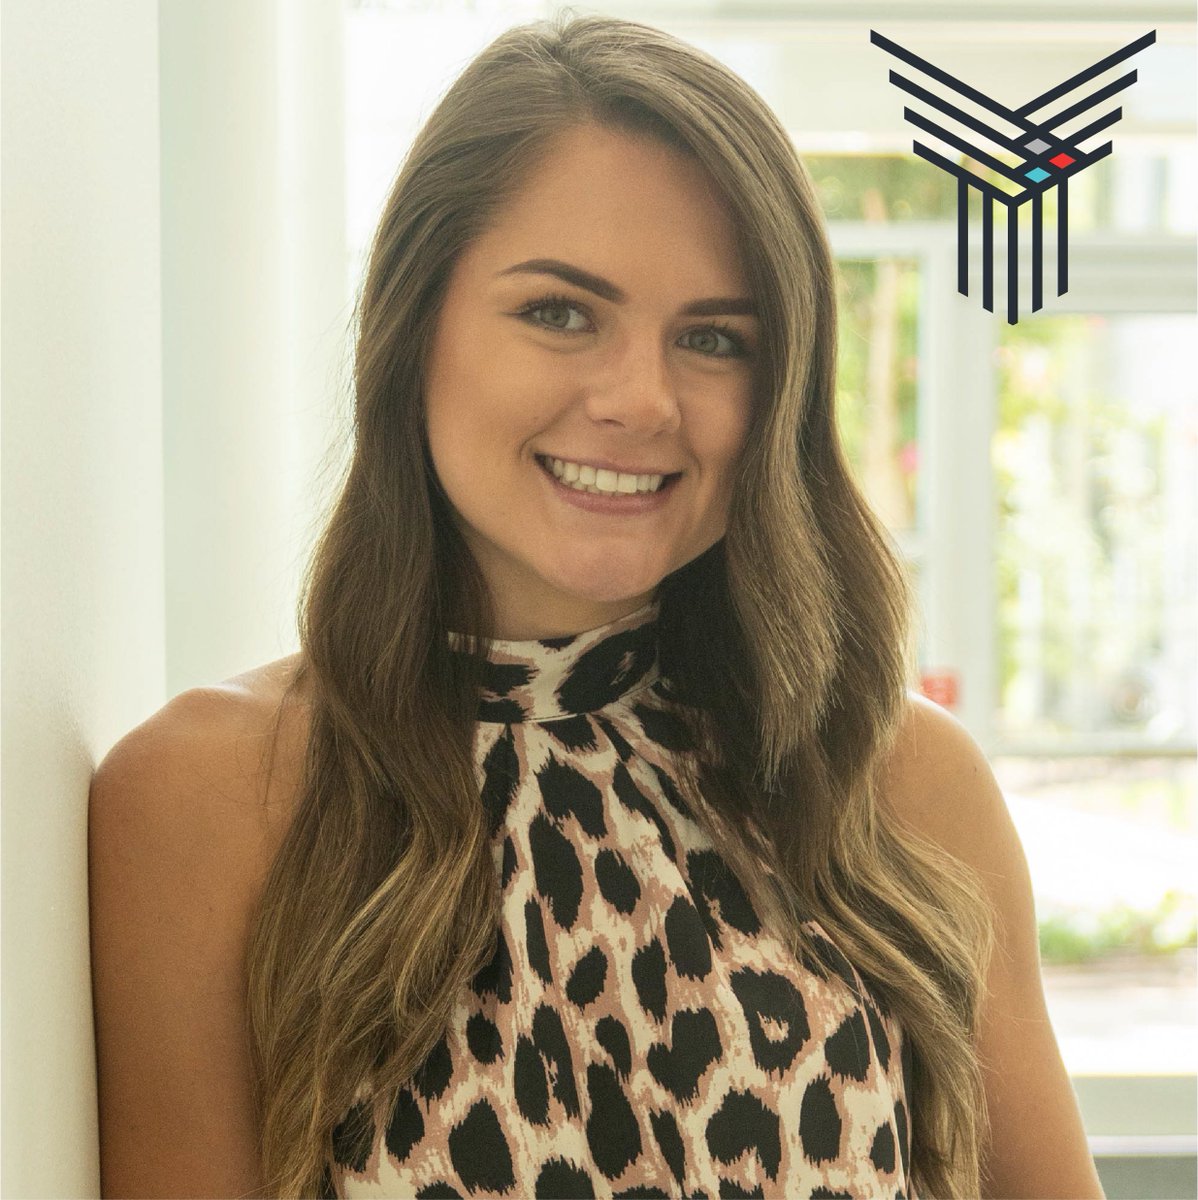 Today marks Abbi Walters' 1-year #Pegaversary as an awesome #AccountManager at Pegasus! Join us in congratulating her for a year of hard work and dedication! Cheers to 1 year and many more, Abbi!